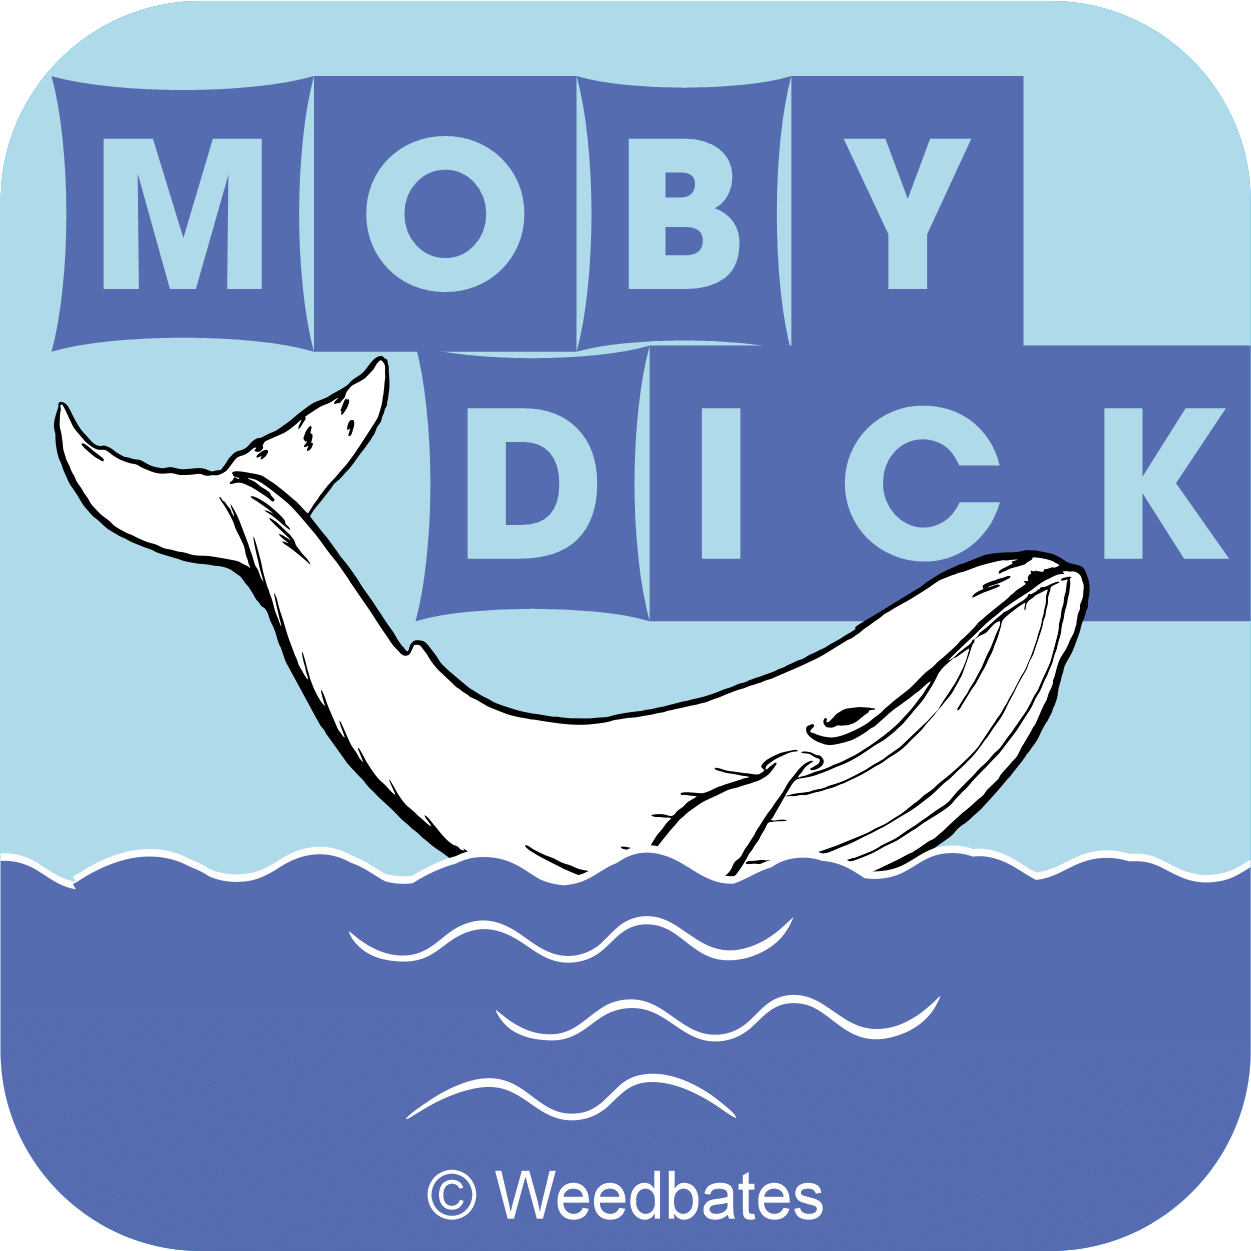 Moby Dick strain